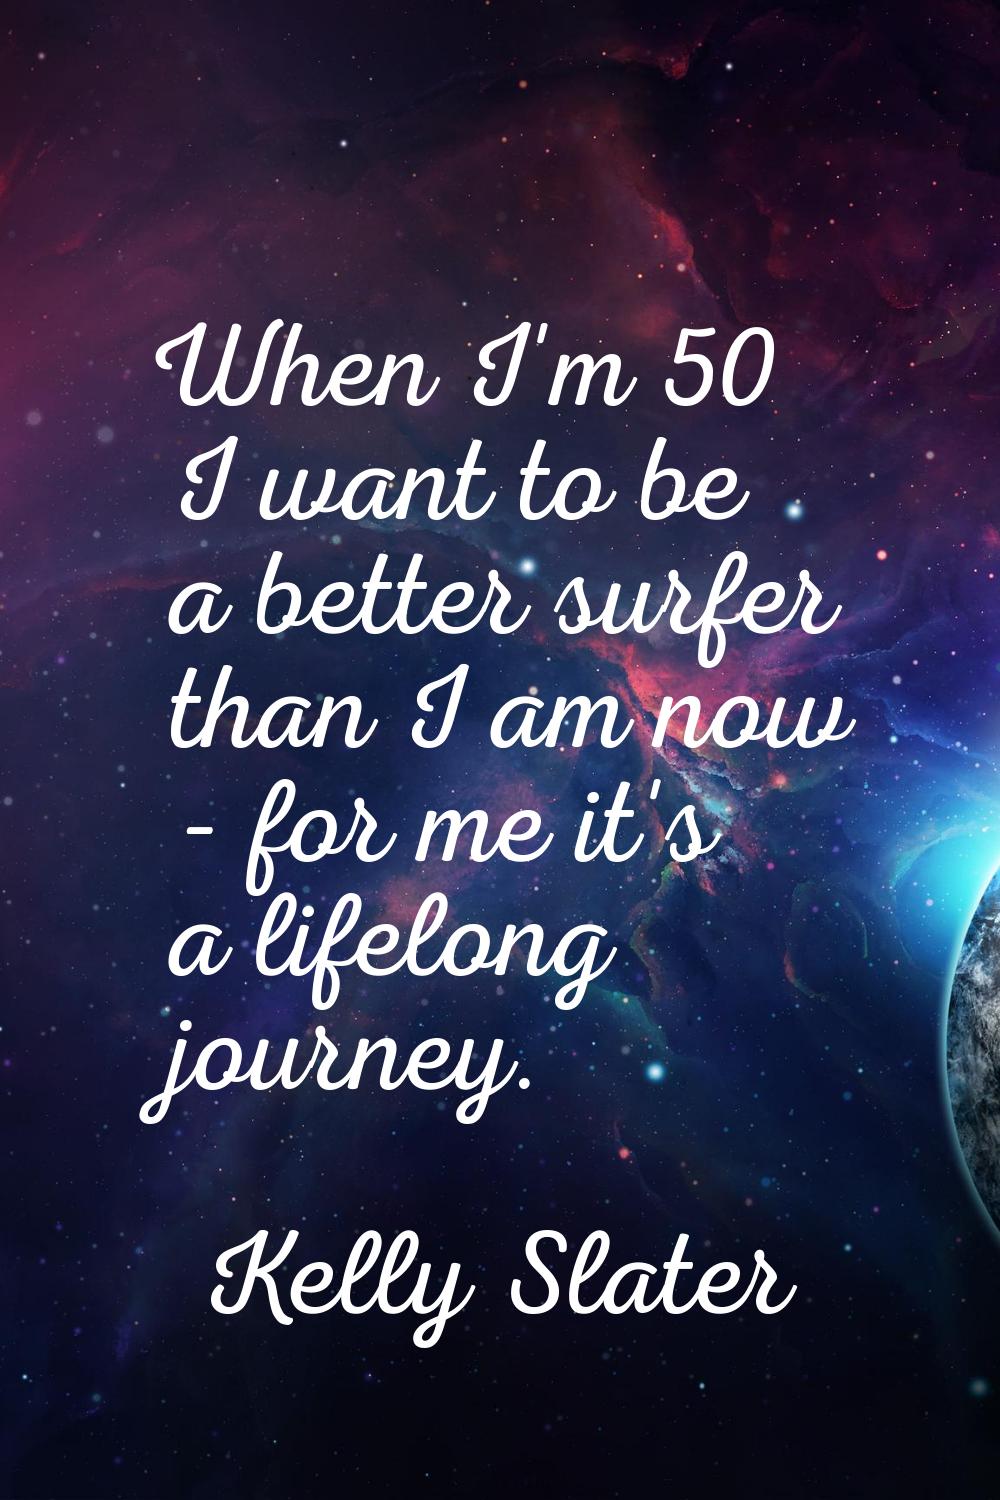 When I'm 50 I want to be a better surfer than I am now - for me it's a lifelong journey.